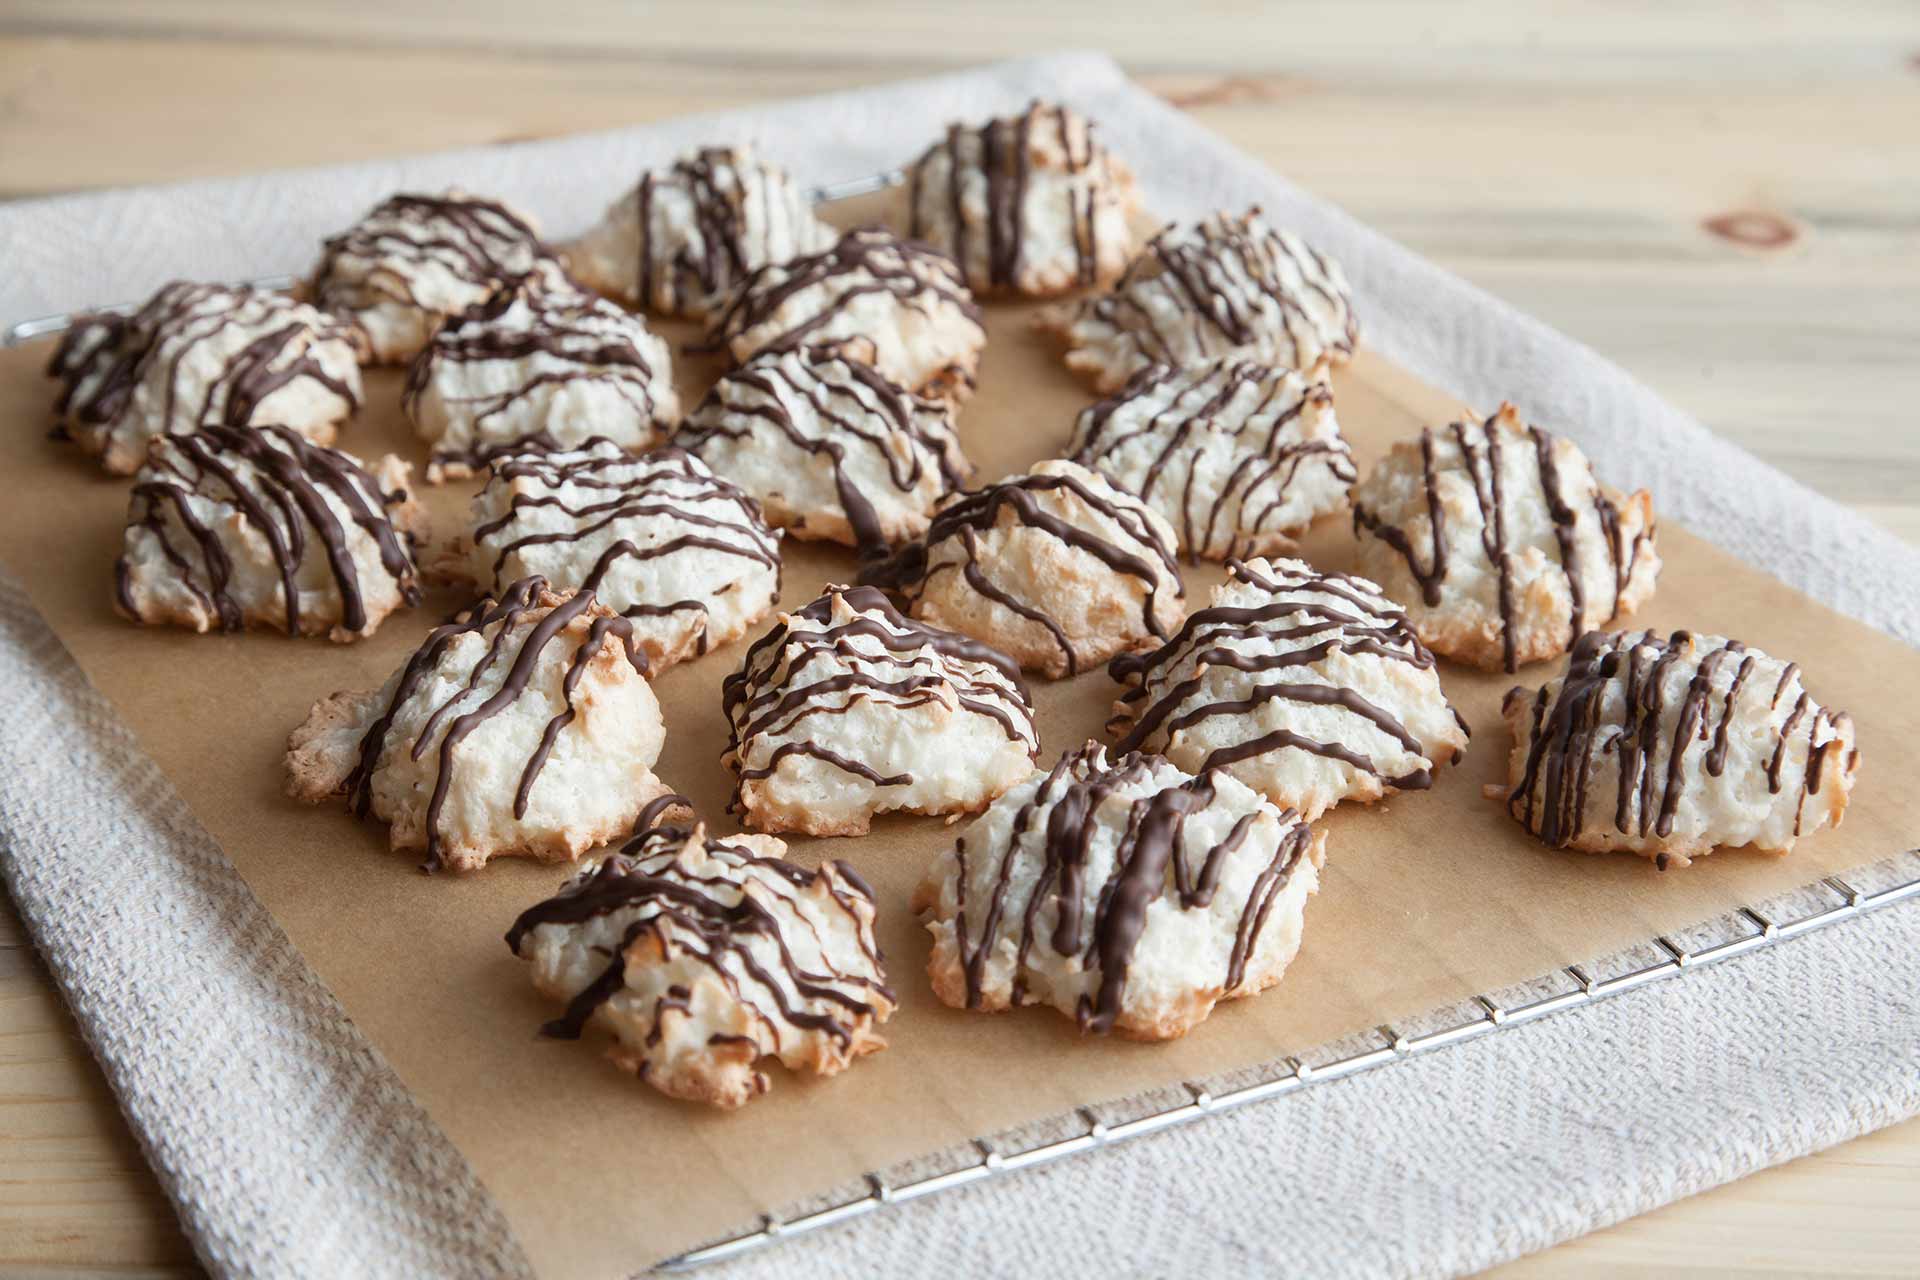 A plate of cookies drizzled with chocolate on a cooling rack.